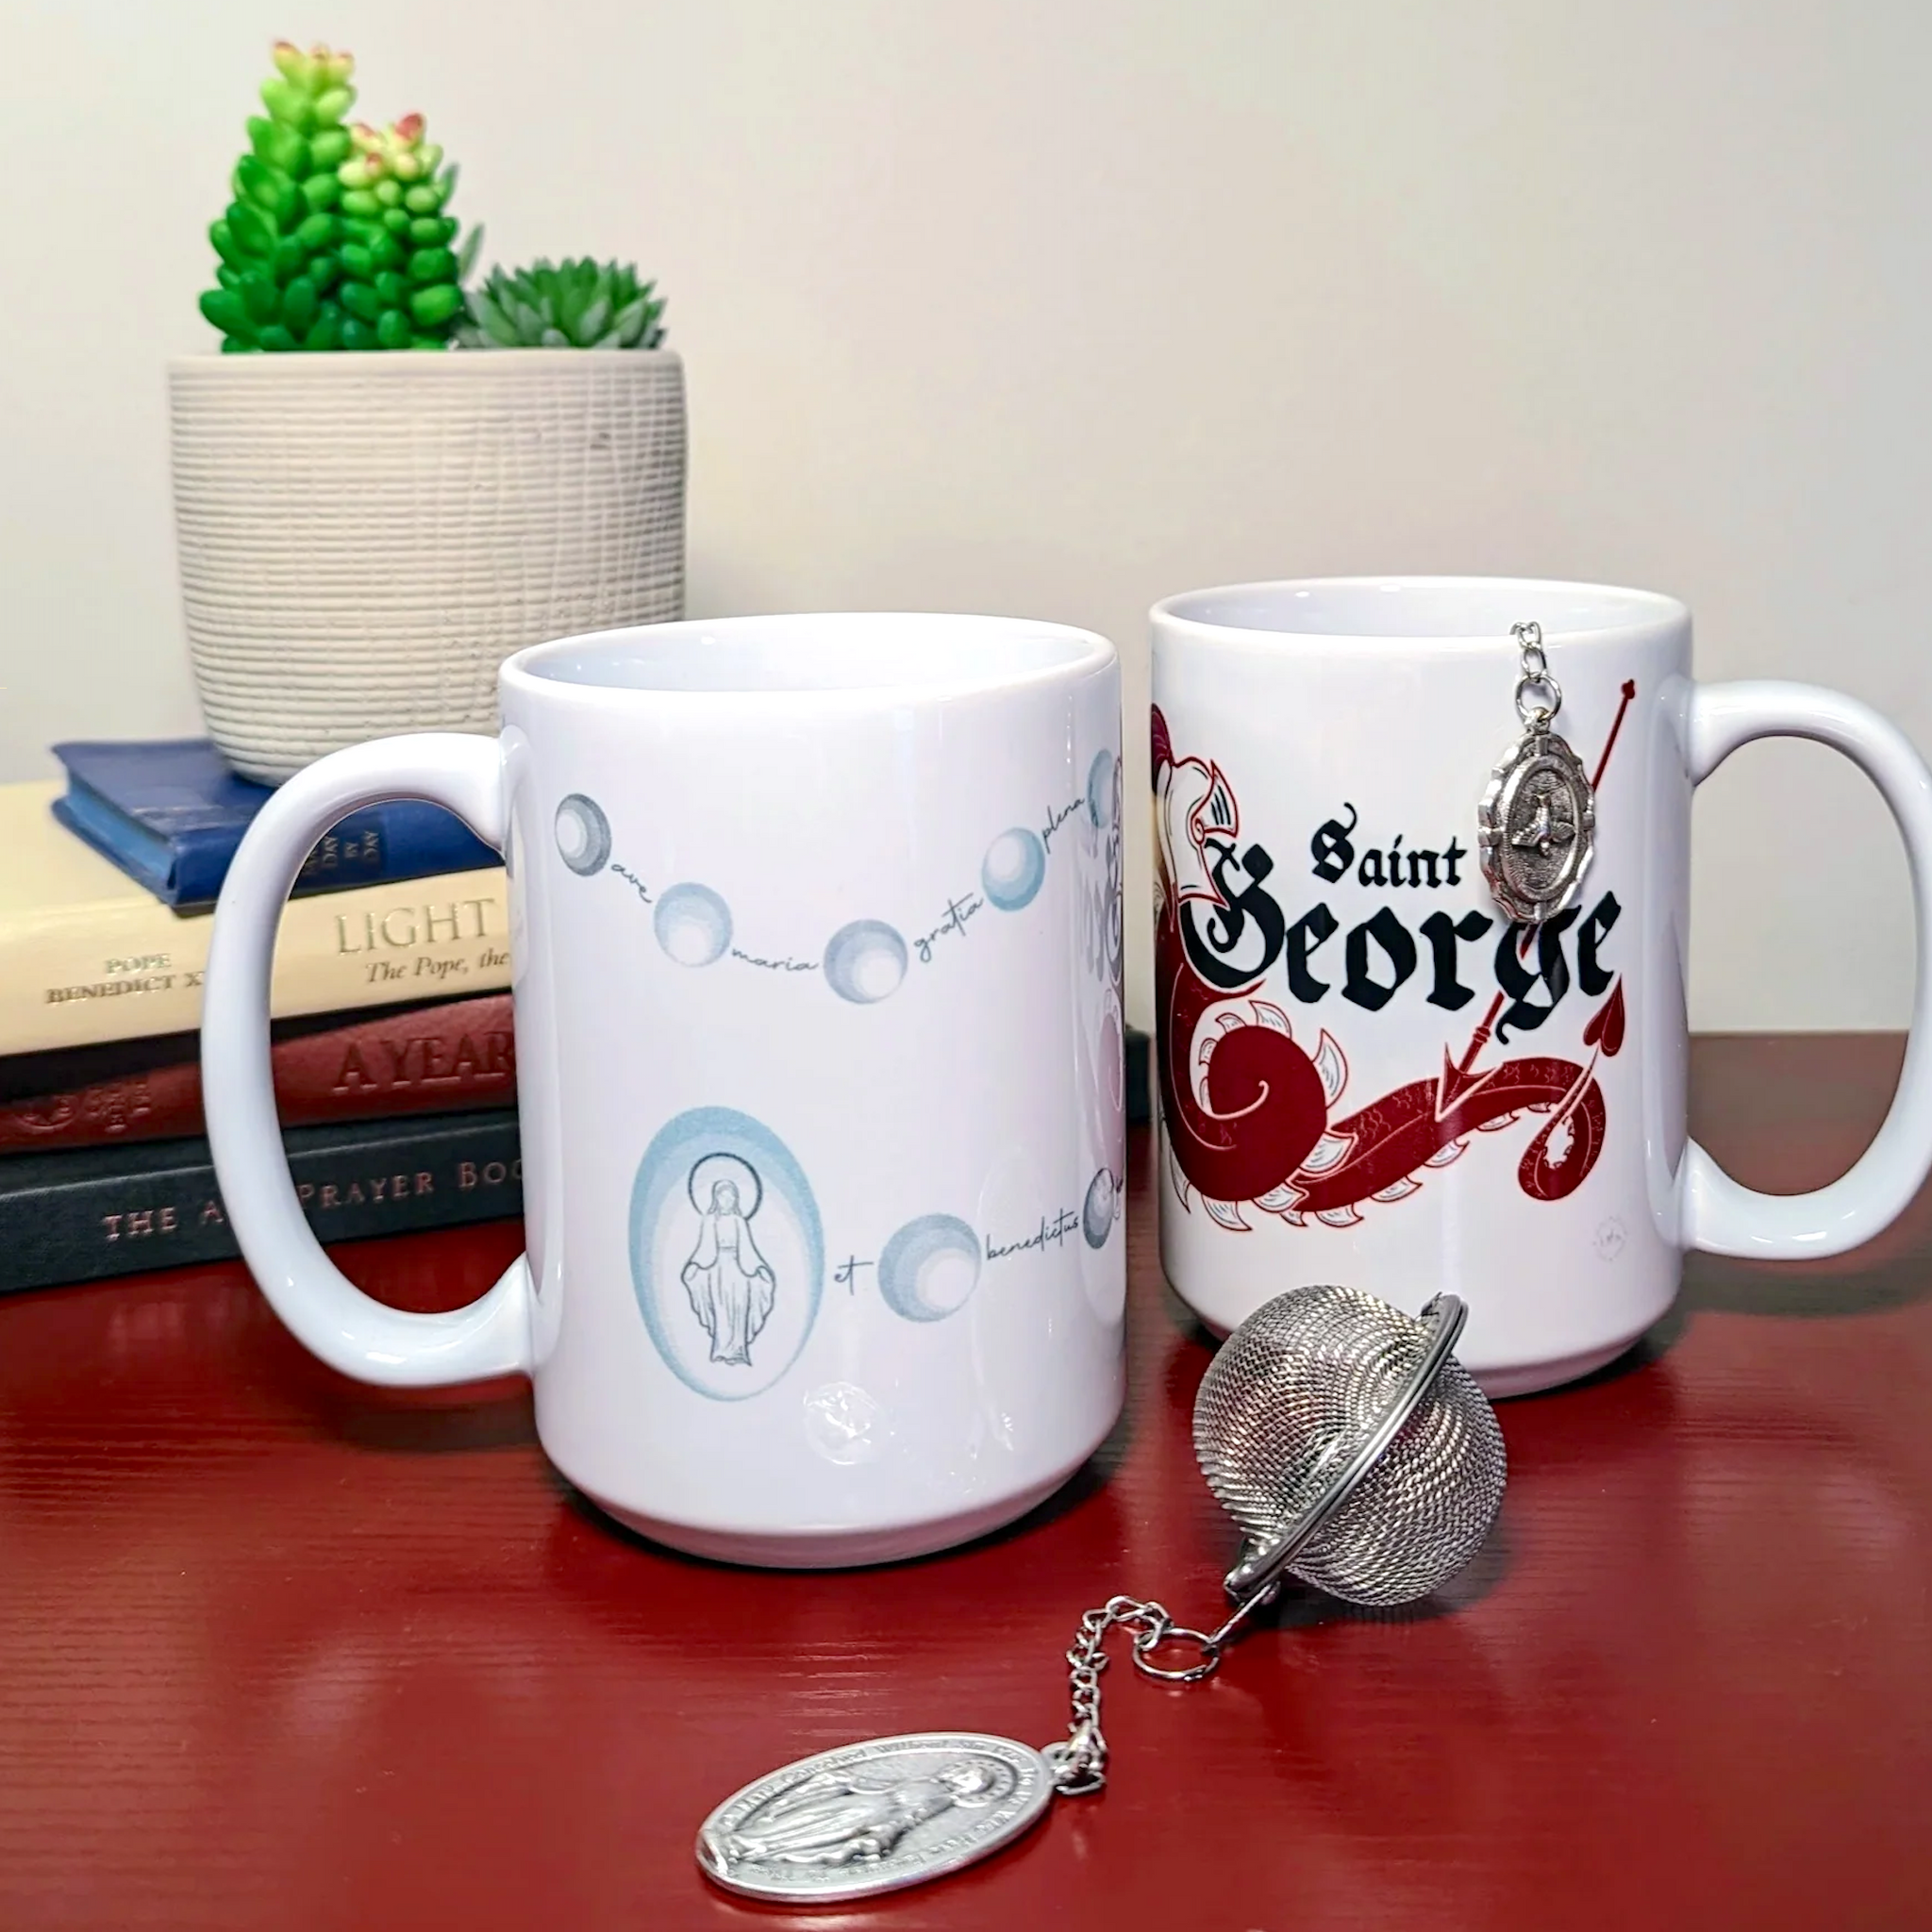 Two Catholic mugs. One mug has a rosary and miraculous medal design while the other mug has a dragon and the name "Saint George" on it. A miraculous medal tea infuser is displayed in front of the two mugs. A Holy Spirit medal is displayed off the side of the St. George mug.